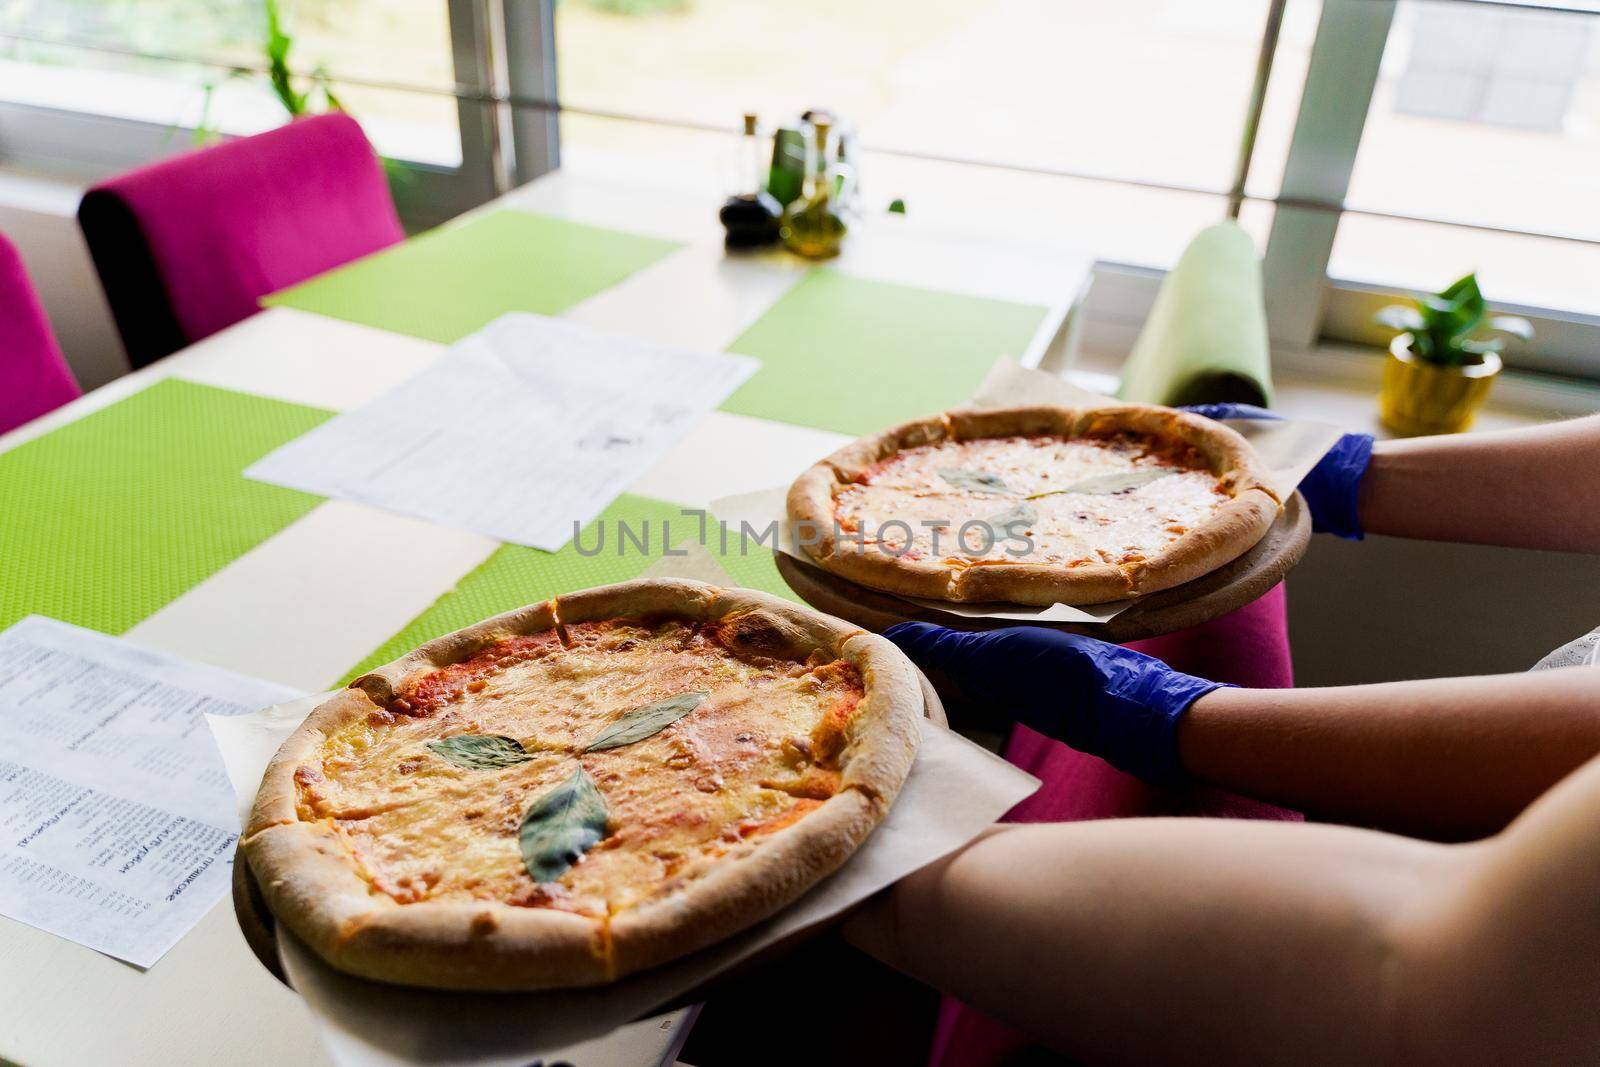 Pizza with tomatoes, mozzarella cheese, basil. Waiter with gloves takes out margarita pizza by Rabizo